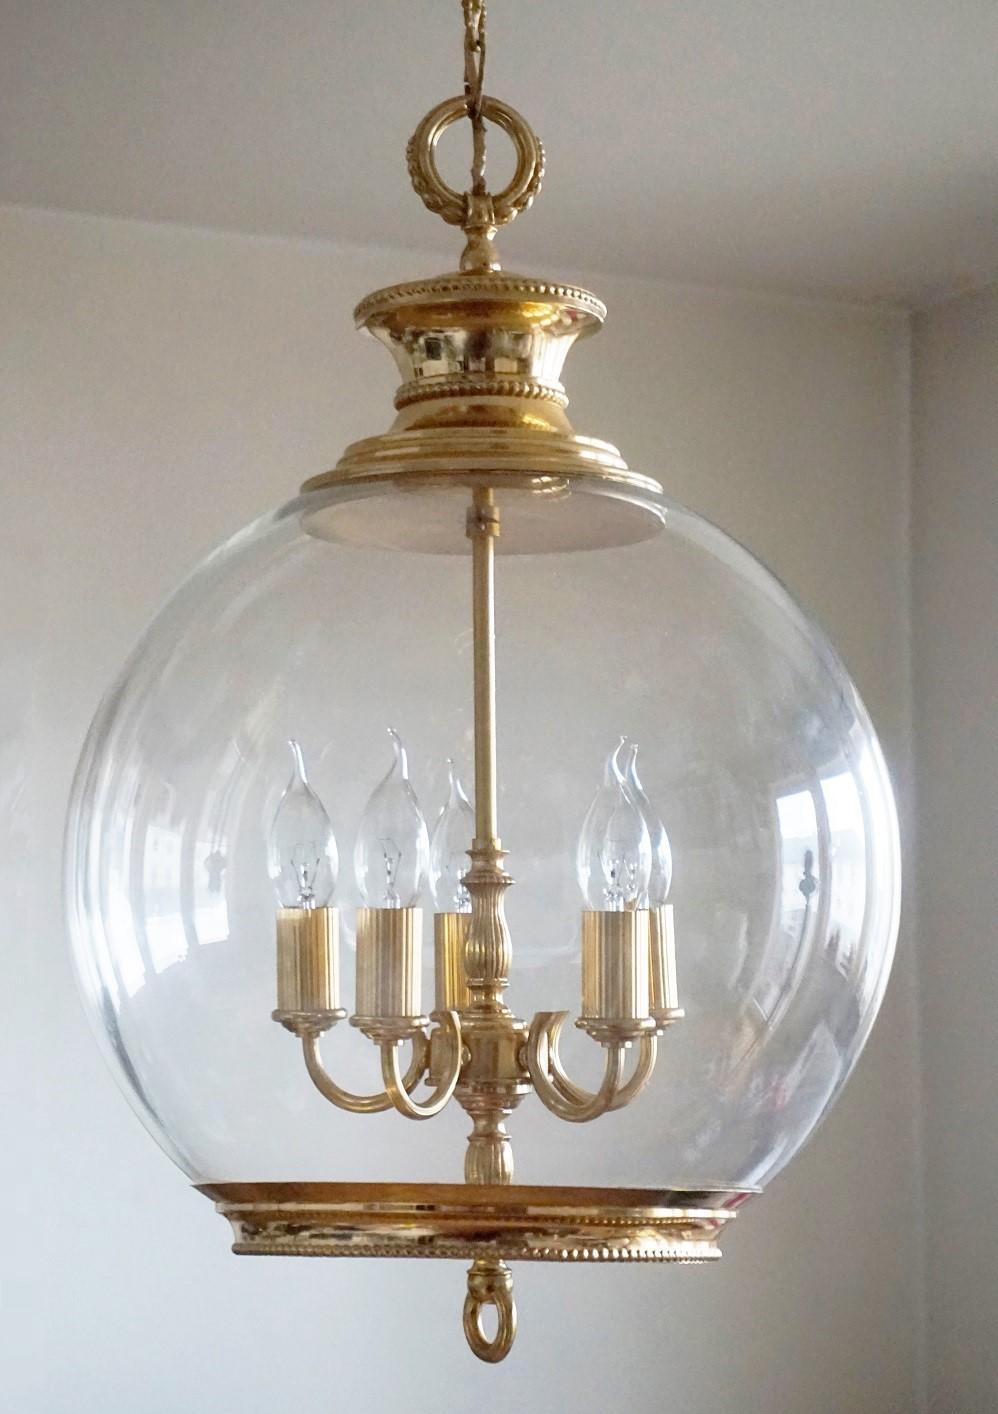 A large Art Deco hand blown glass lantern with elegant brass mounts, France, 1930-1939.
Five E-14 candelabra bulb sockets.
Measures:
Overall height with chain and canopy: 52